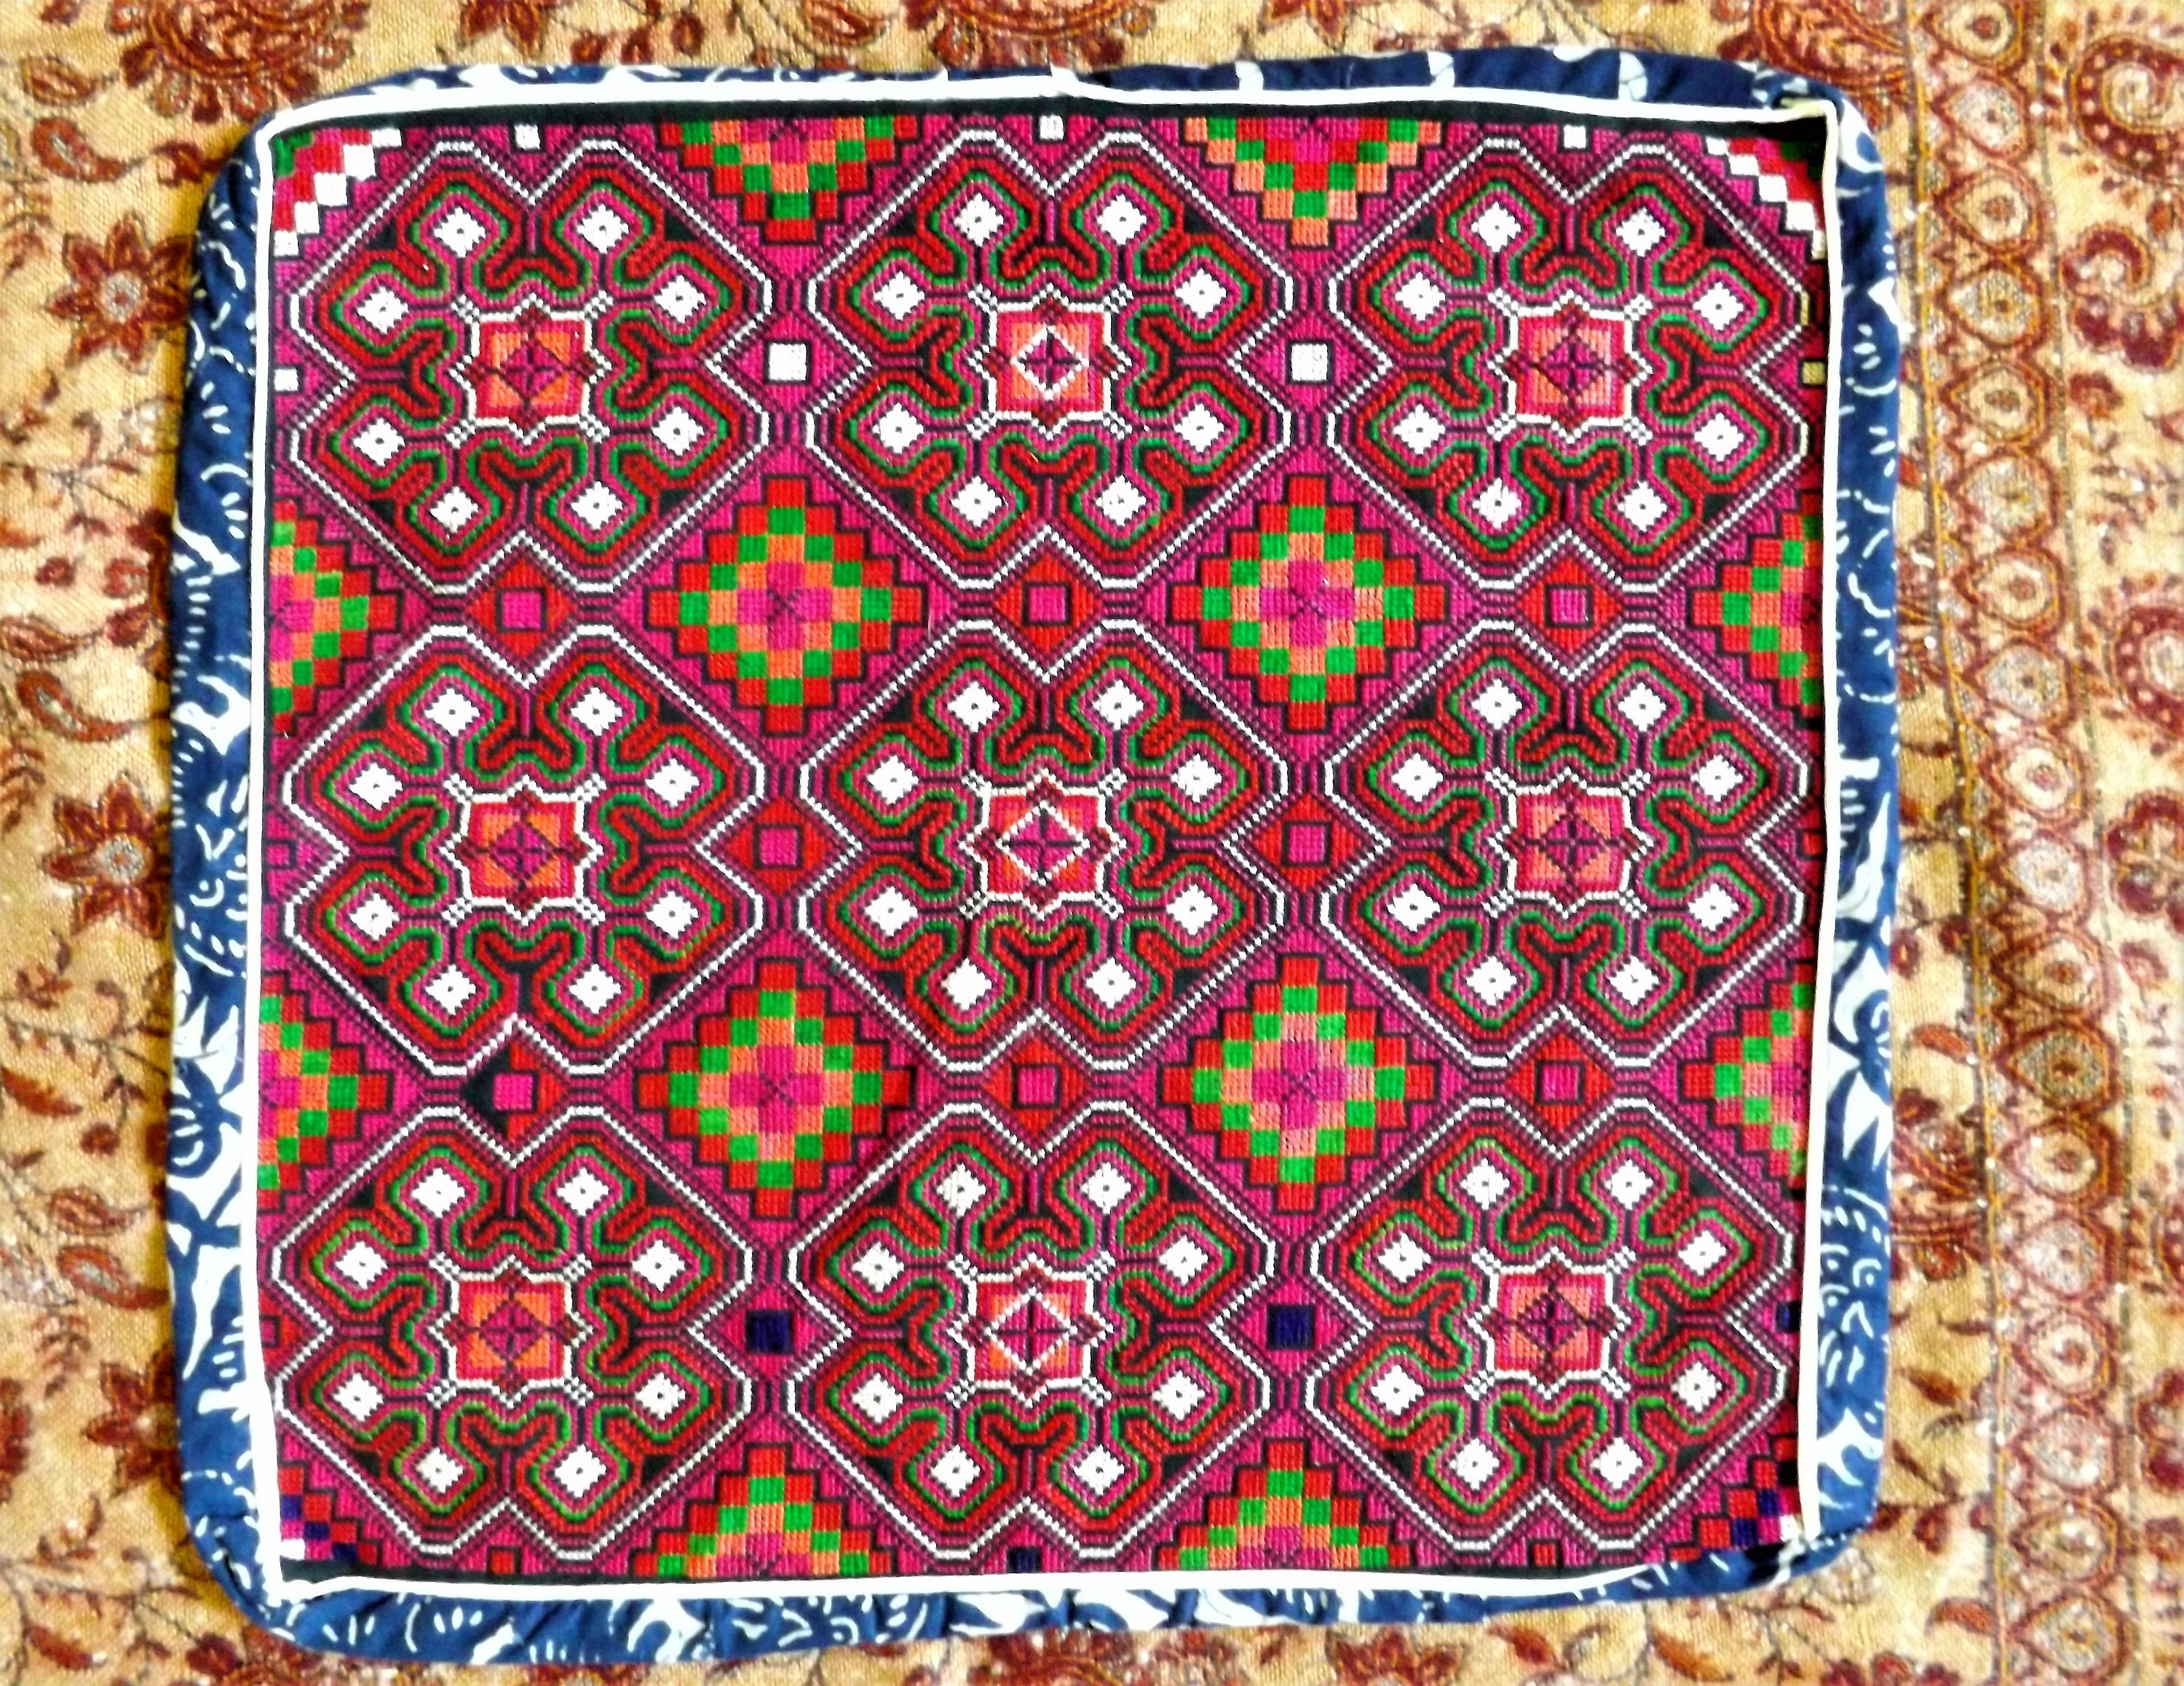 Hmong Embroidery Patterns Embroidery Hmong Embroidery Cushion Cover Handmade Embroidered Art Collection Miao Hmong 1970